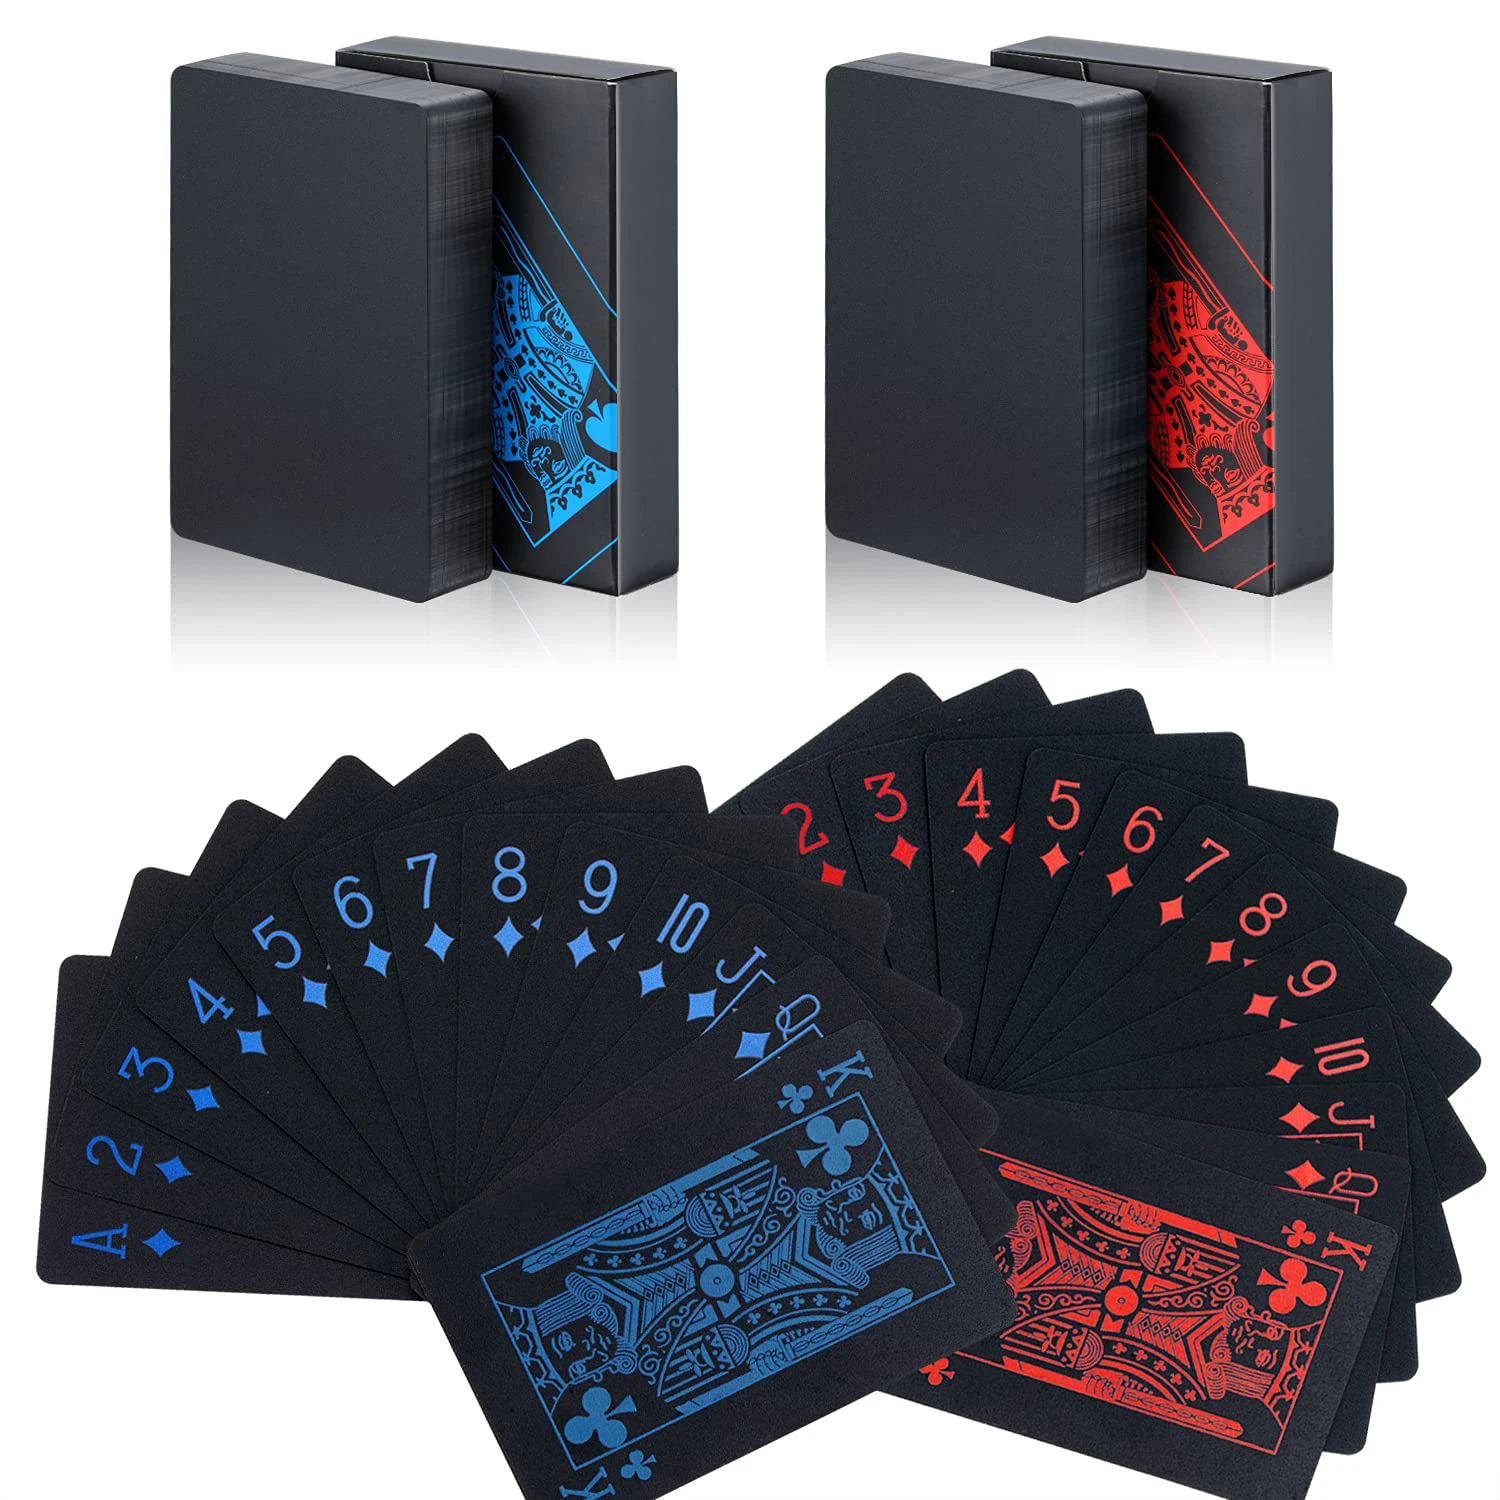 pvc-poker-waterproof-plastic-playing-cards-set-black-color-poker-card-sets-classic-party-travel-tricks-tool-poker-games-red-blue